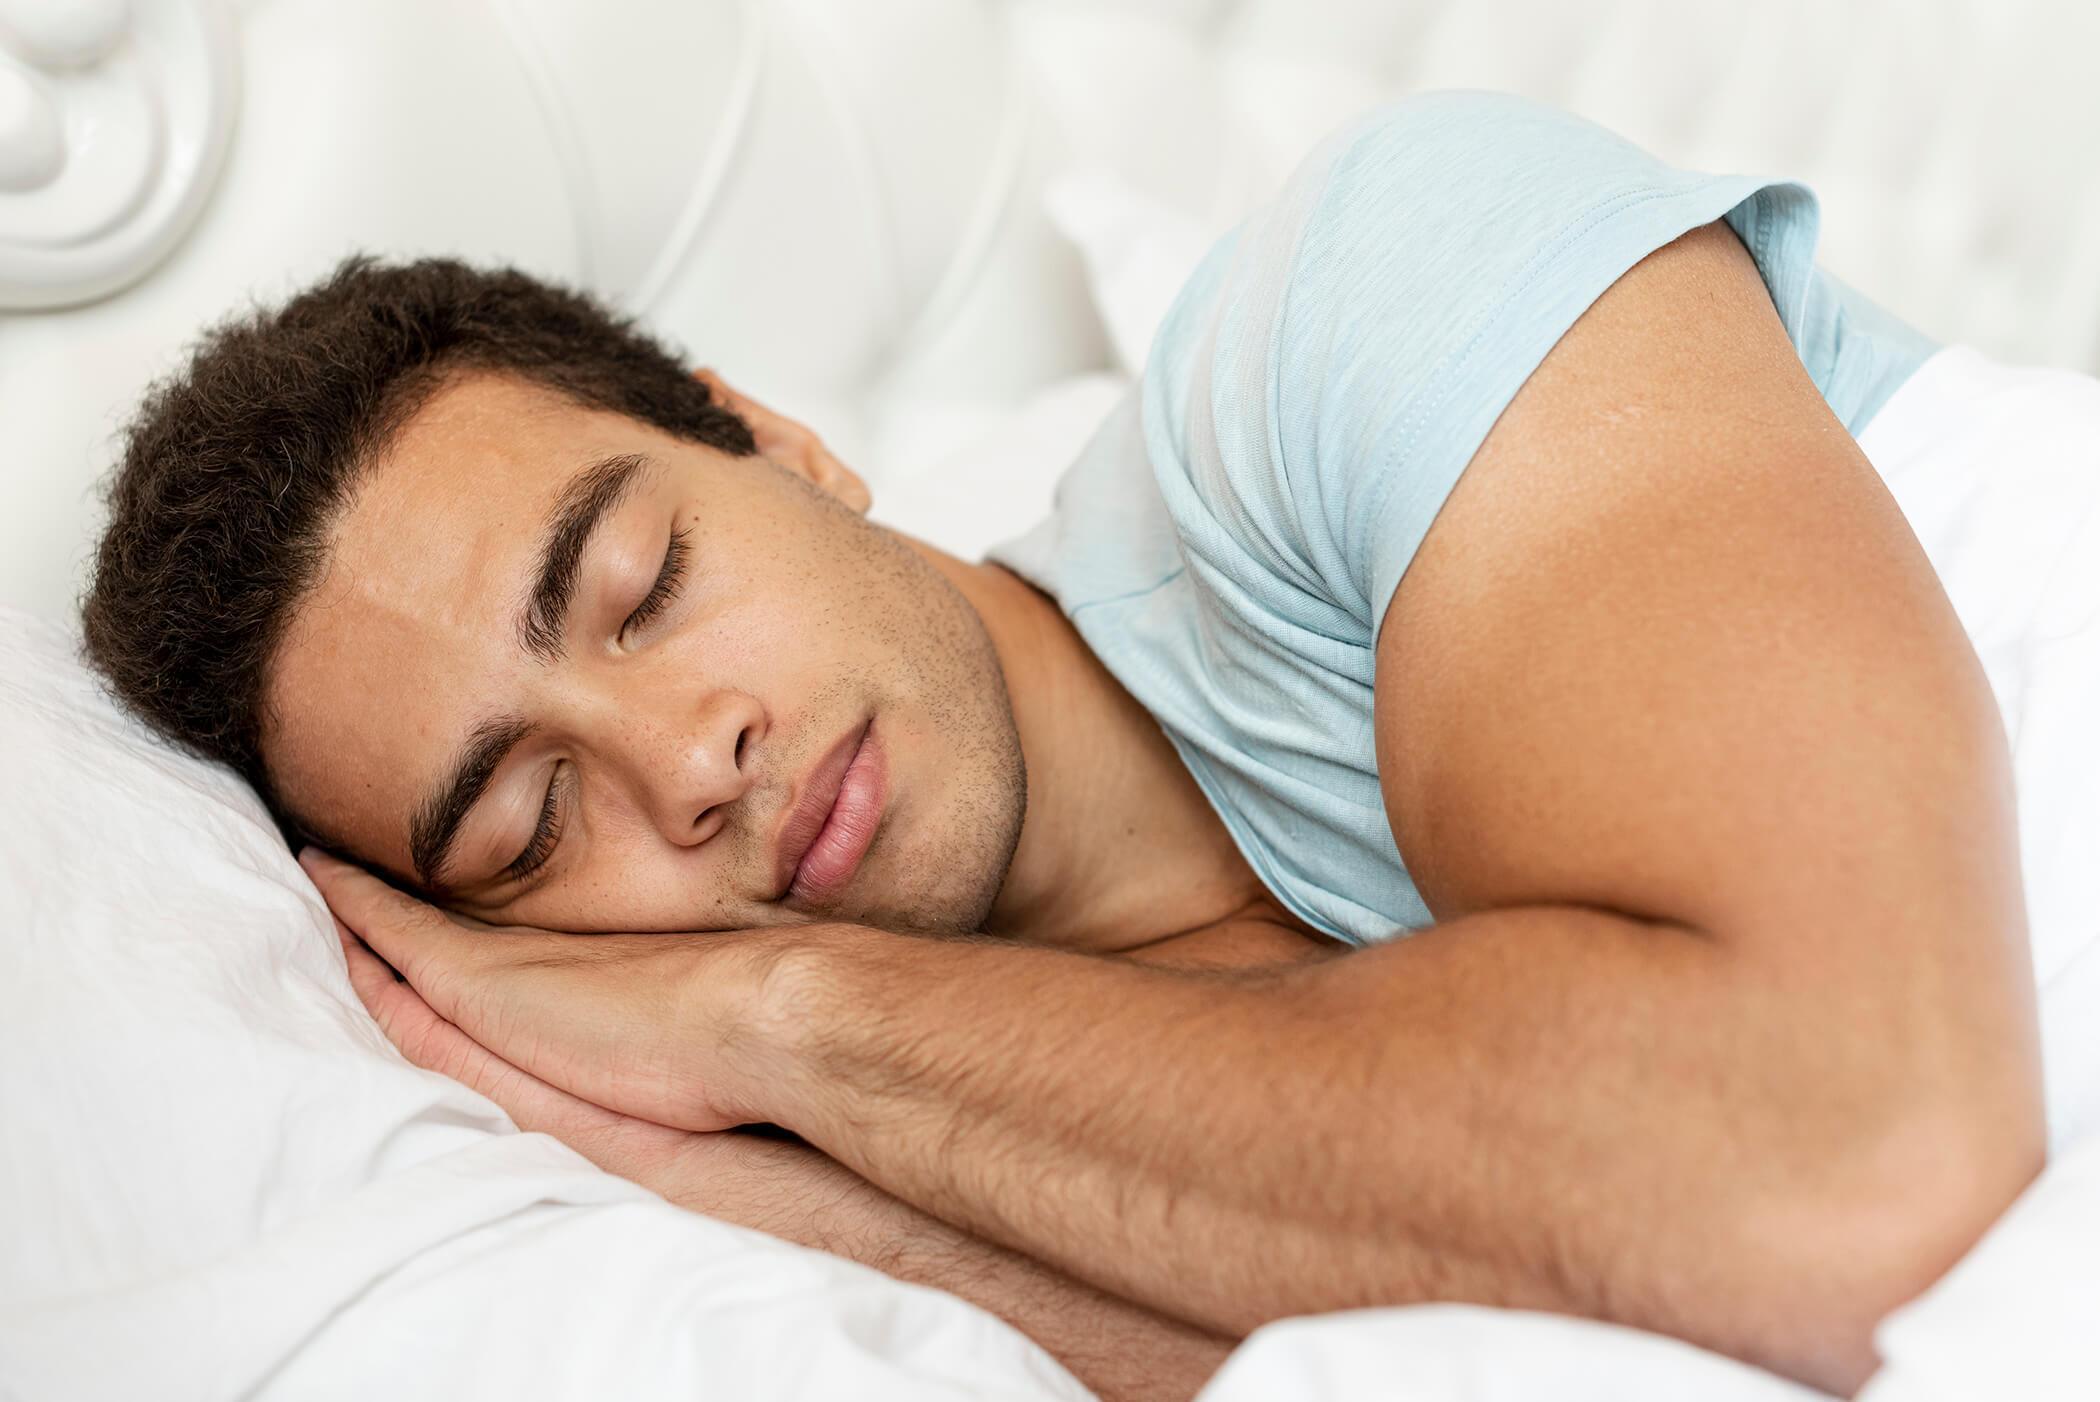 Sleep: The Ultimate Addition to a Man’s Health, Fitness & Sex Life